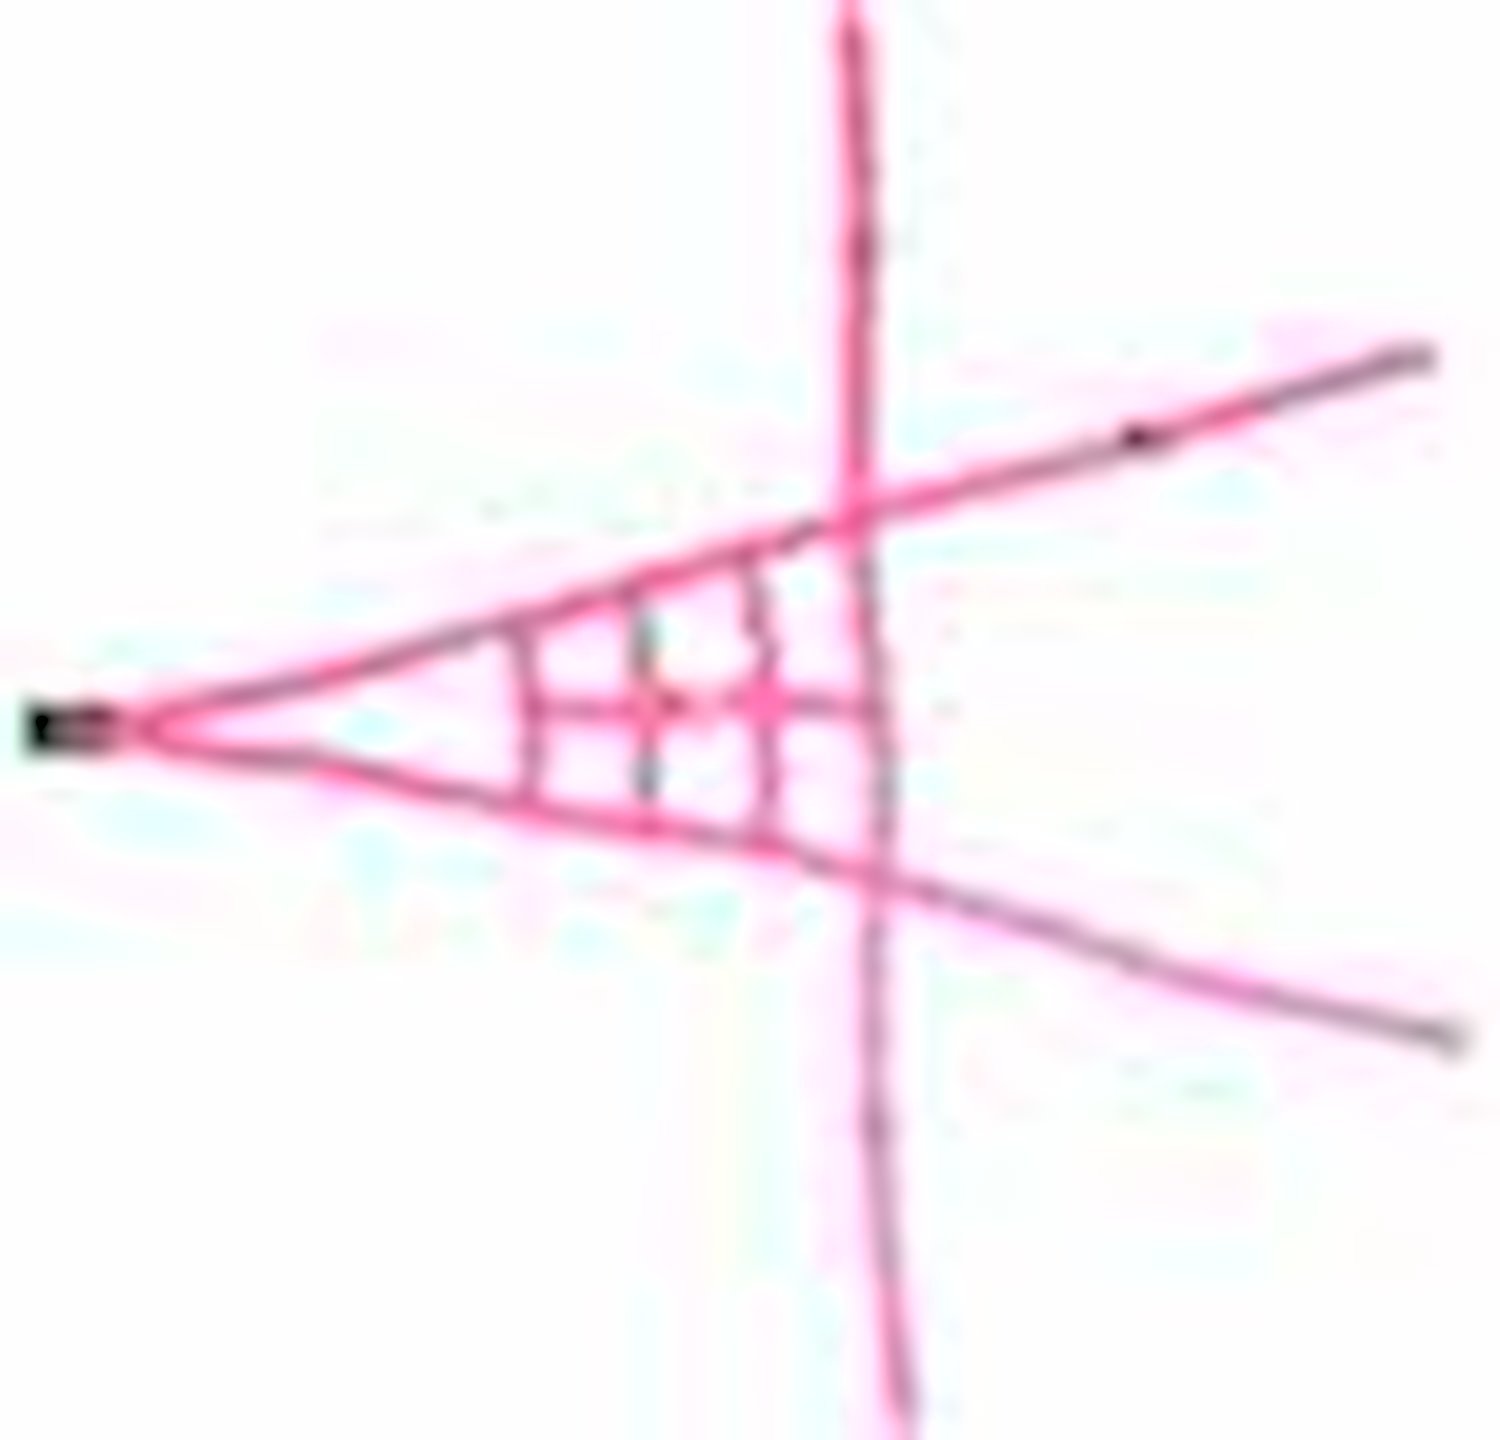 Ribbon ROLL CAGE Net 4 Point NON-SFI HOT PINK